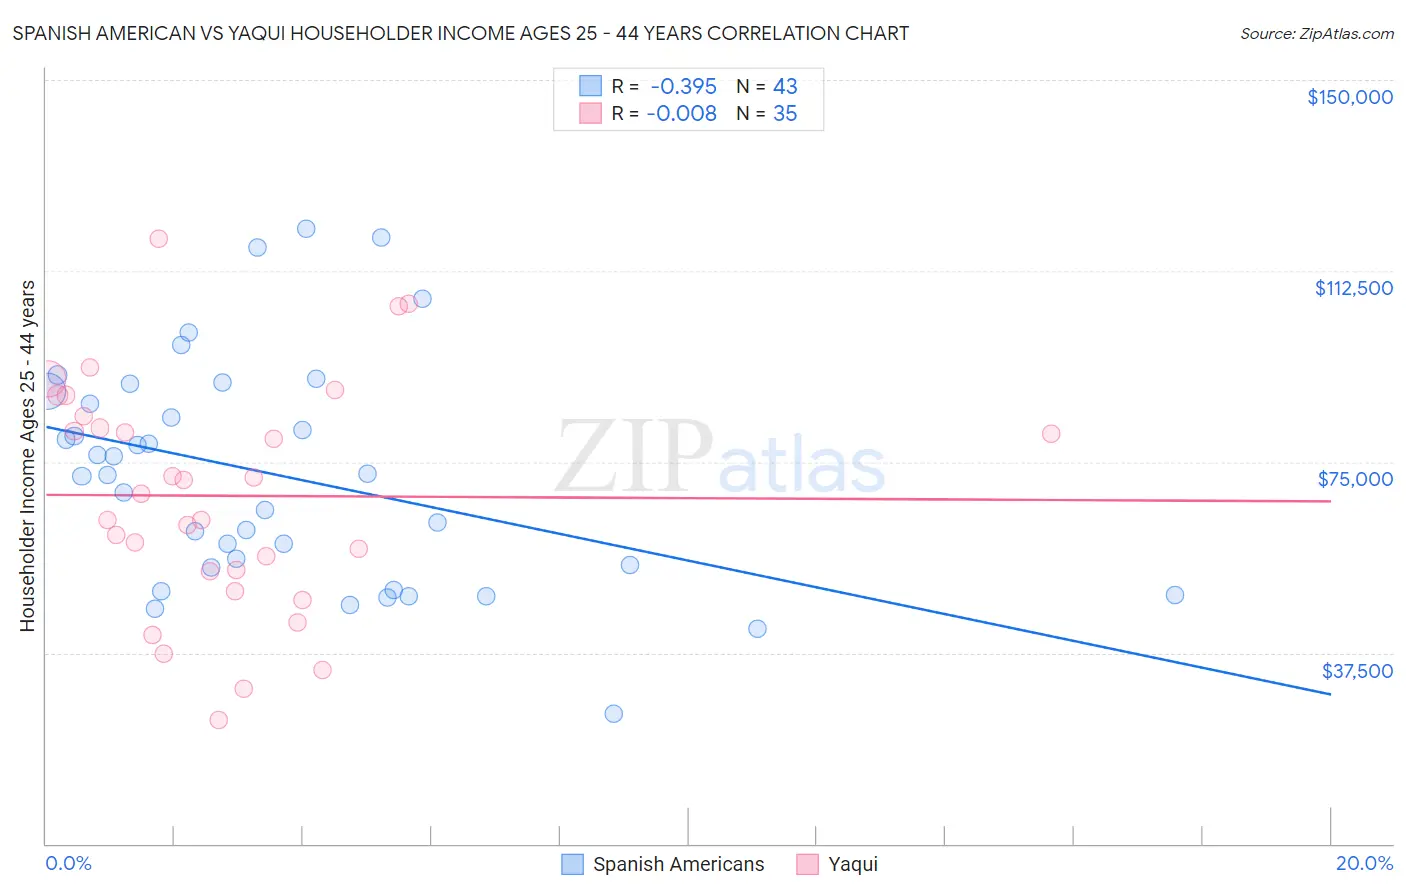 Spanish American vs Yaqui Householder Income Ages 25 - 44 years